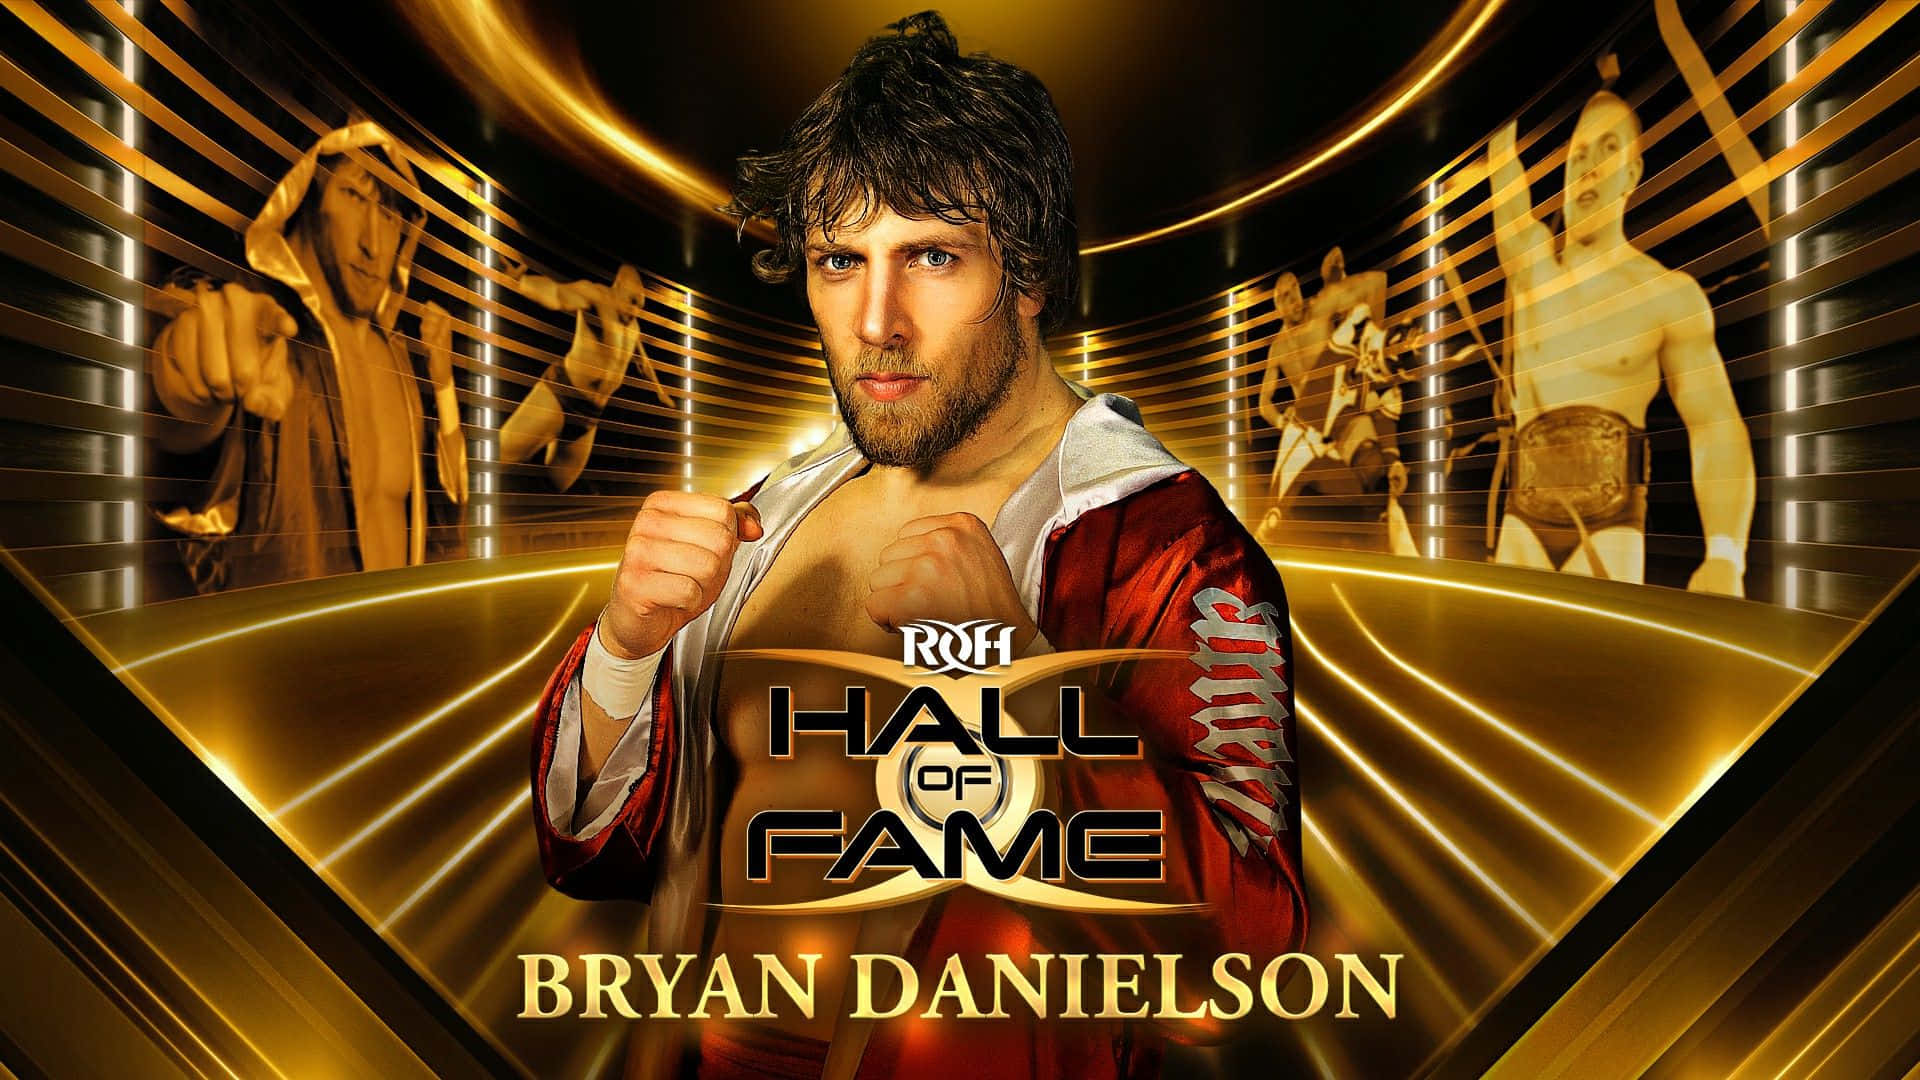 Bryan Danielson Hall Of Fame Design Background